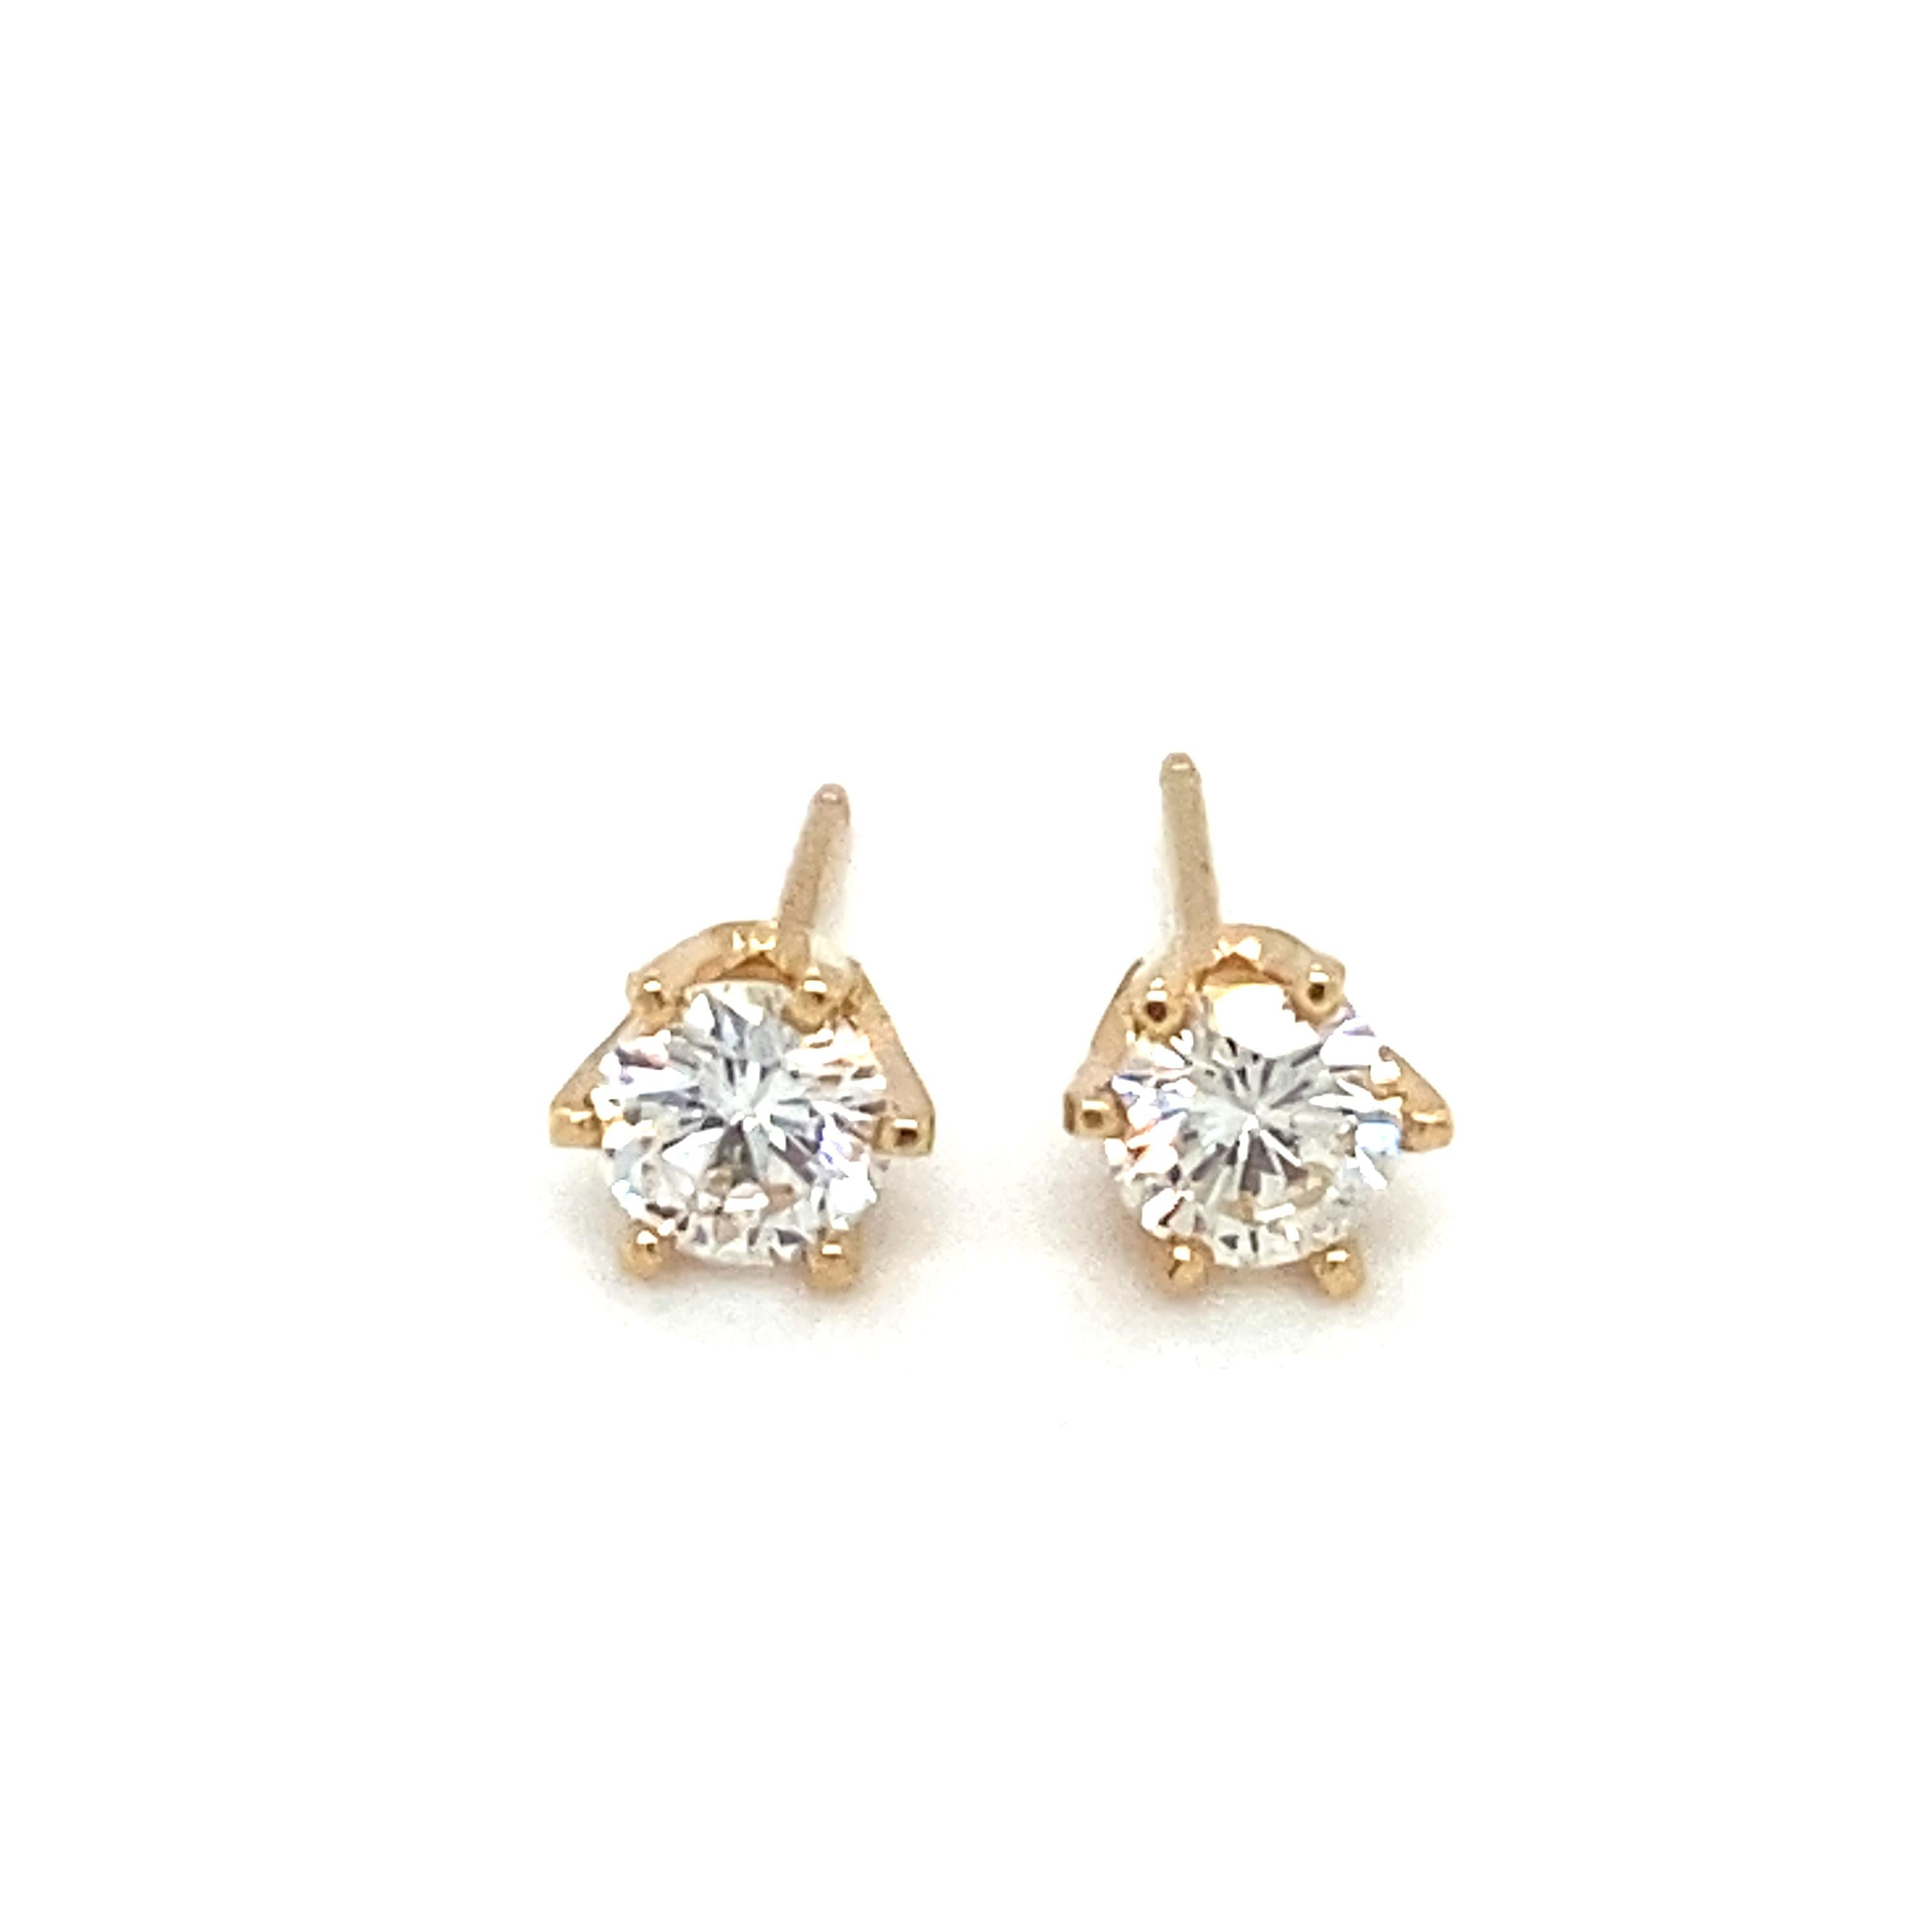 Round Cut 0.67 Carat Total Round Diamond Stud Earrings in 14 Karat Gold, circa 2000s For Sale